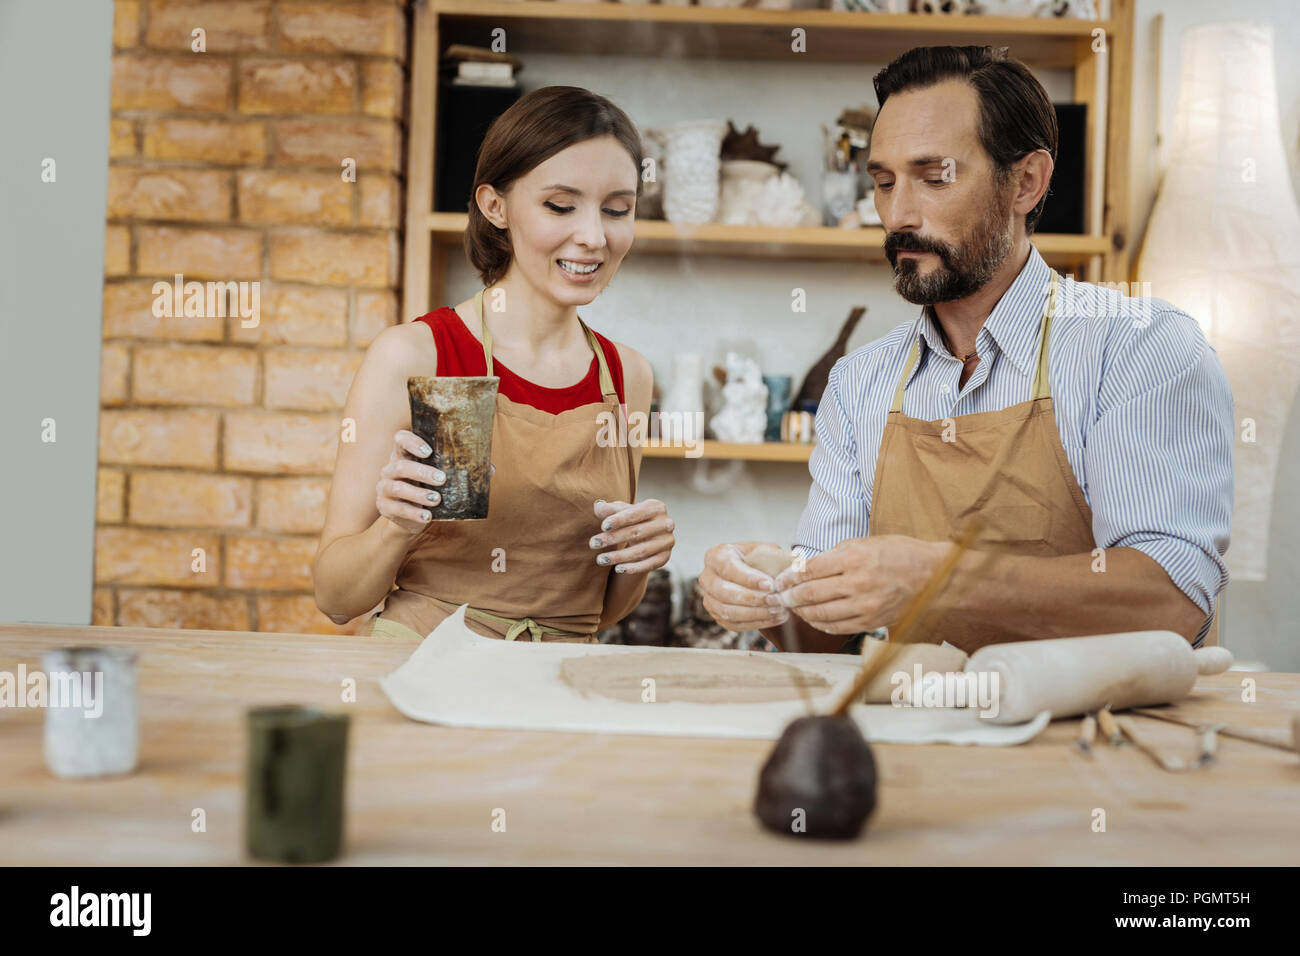 Smiling dark-haired housewife visiting master class in pottery Stock Photo